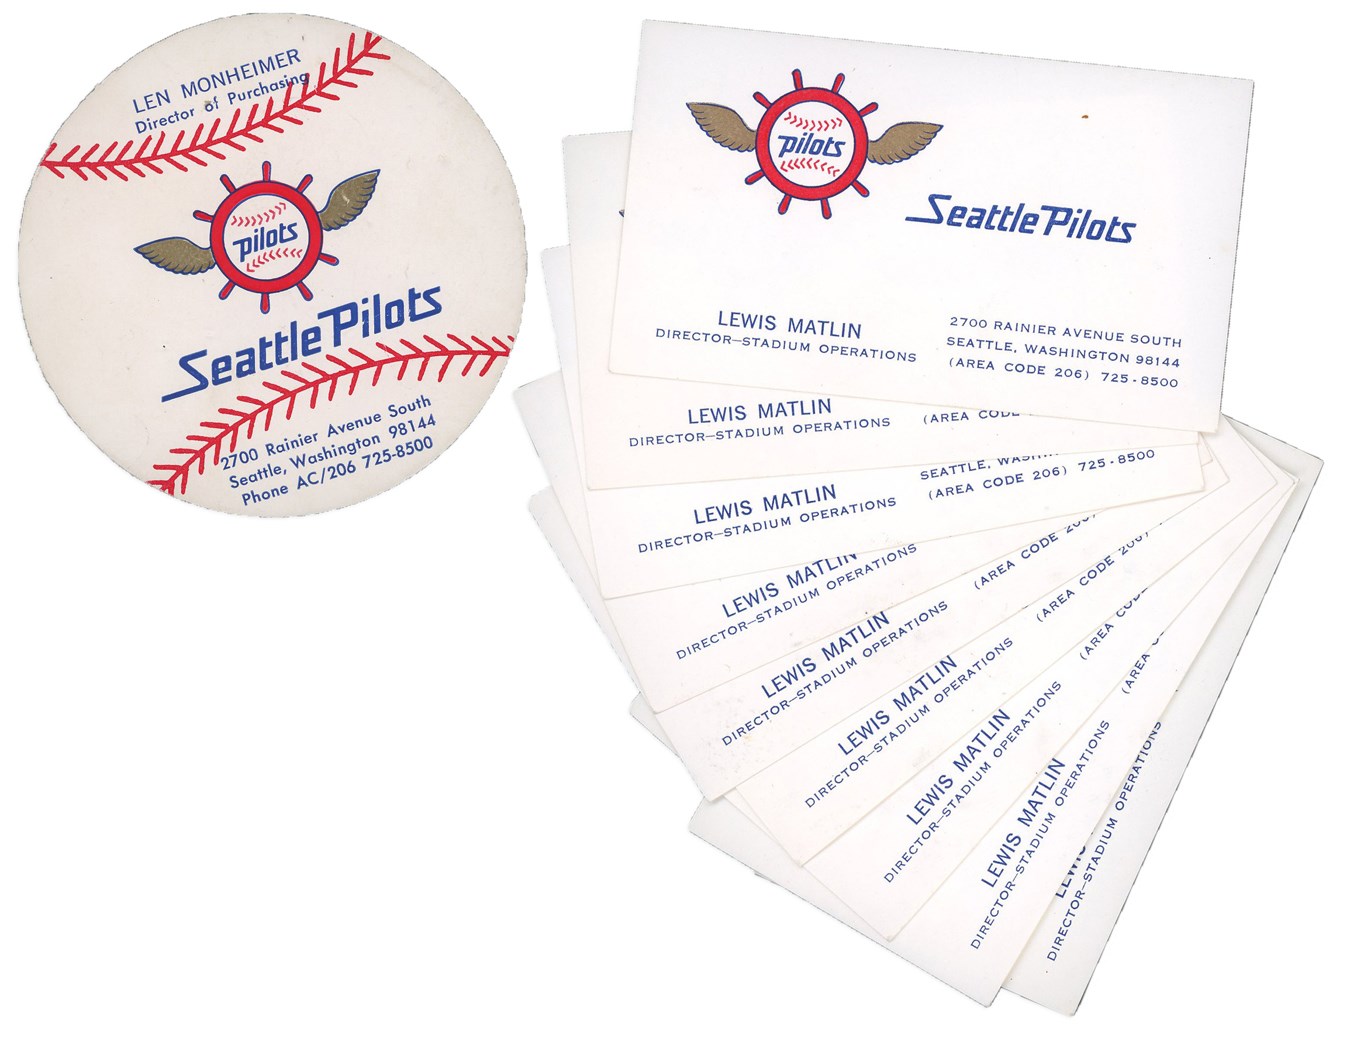 - 1969 Seattle Pilots Business Cards (23)